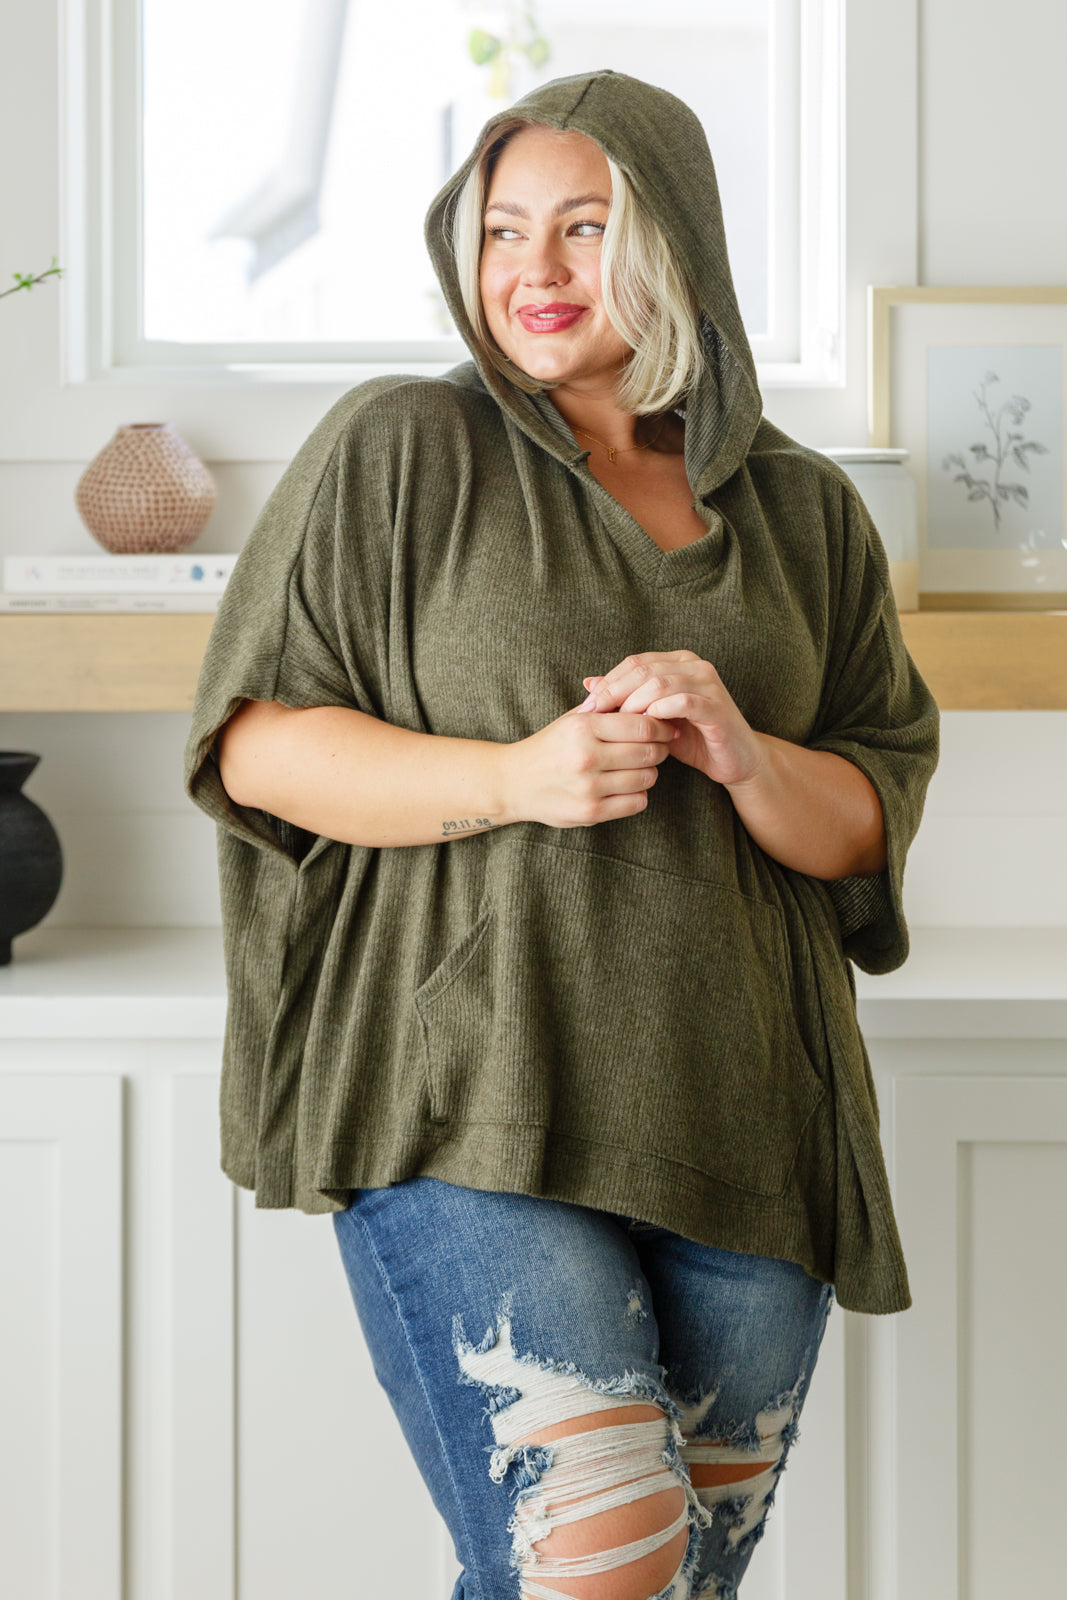 Perfectly Poised Hooded Poncho in Aloe Olive